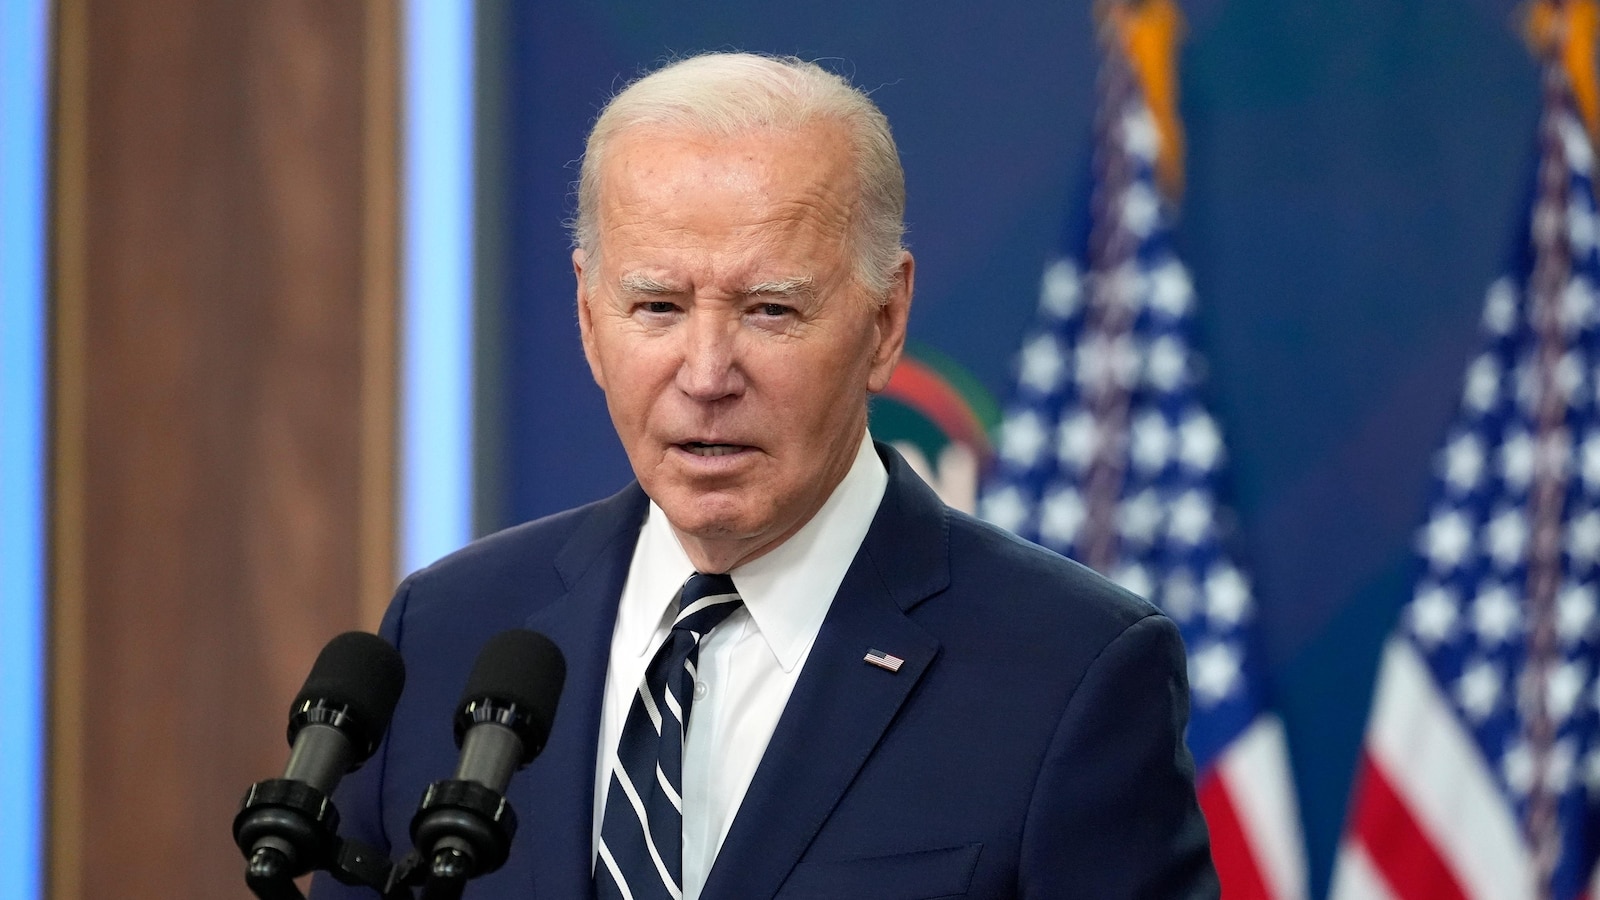 Biden's team asks CEOs how to further stimulate the economy, while Trump says things are on his side